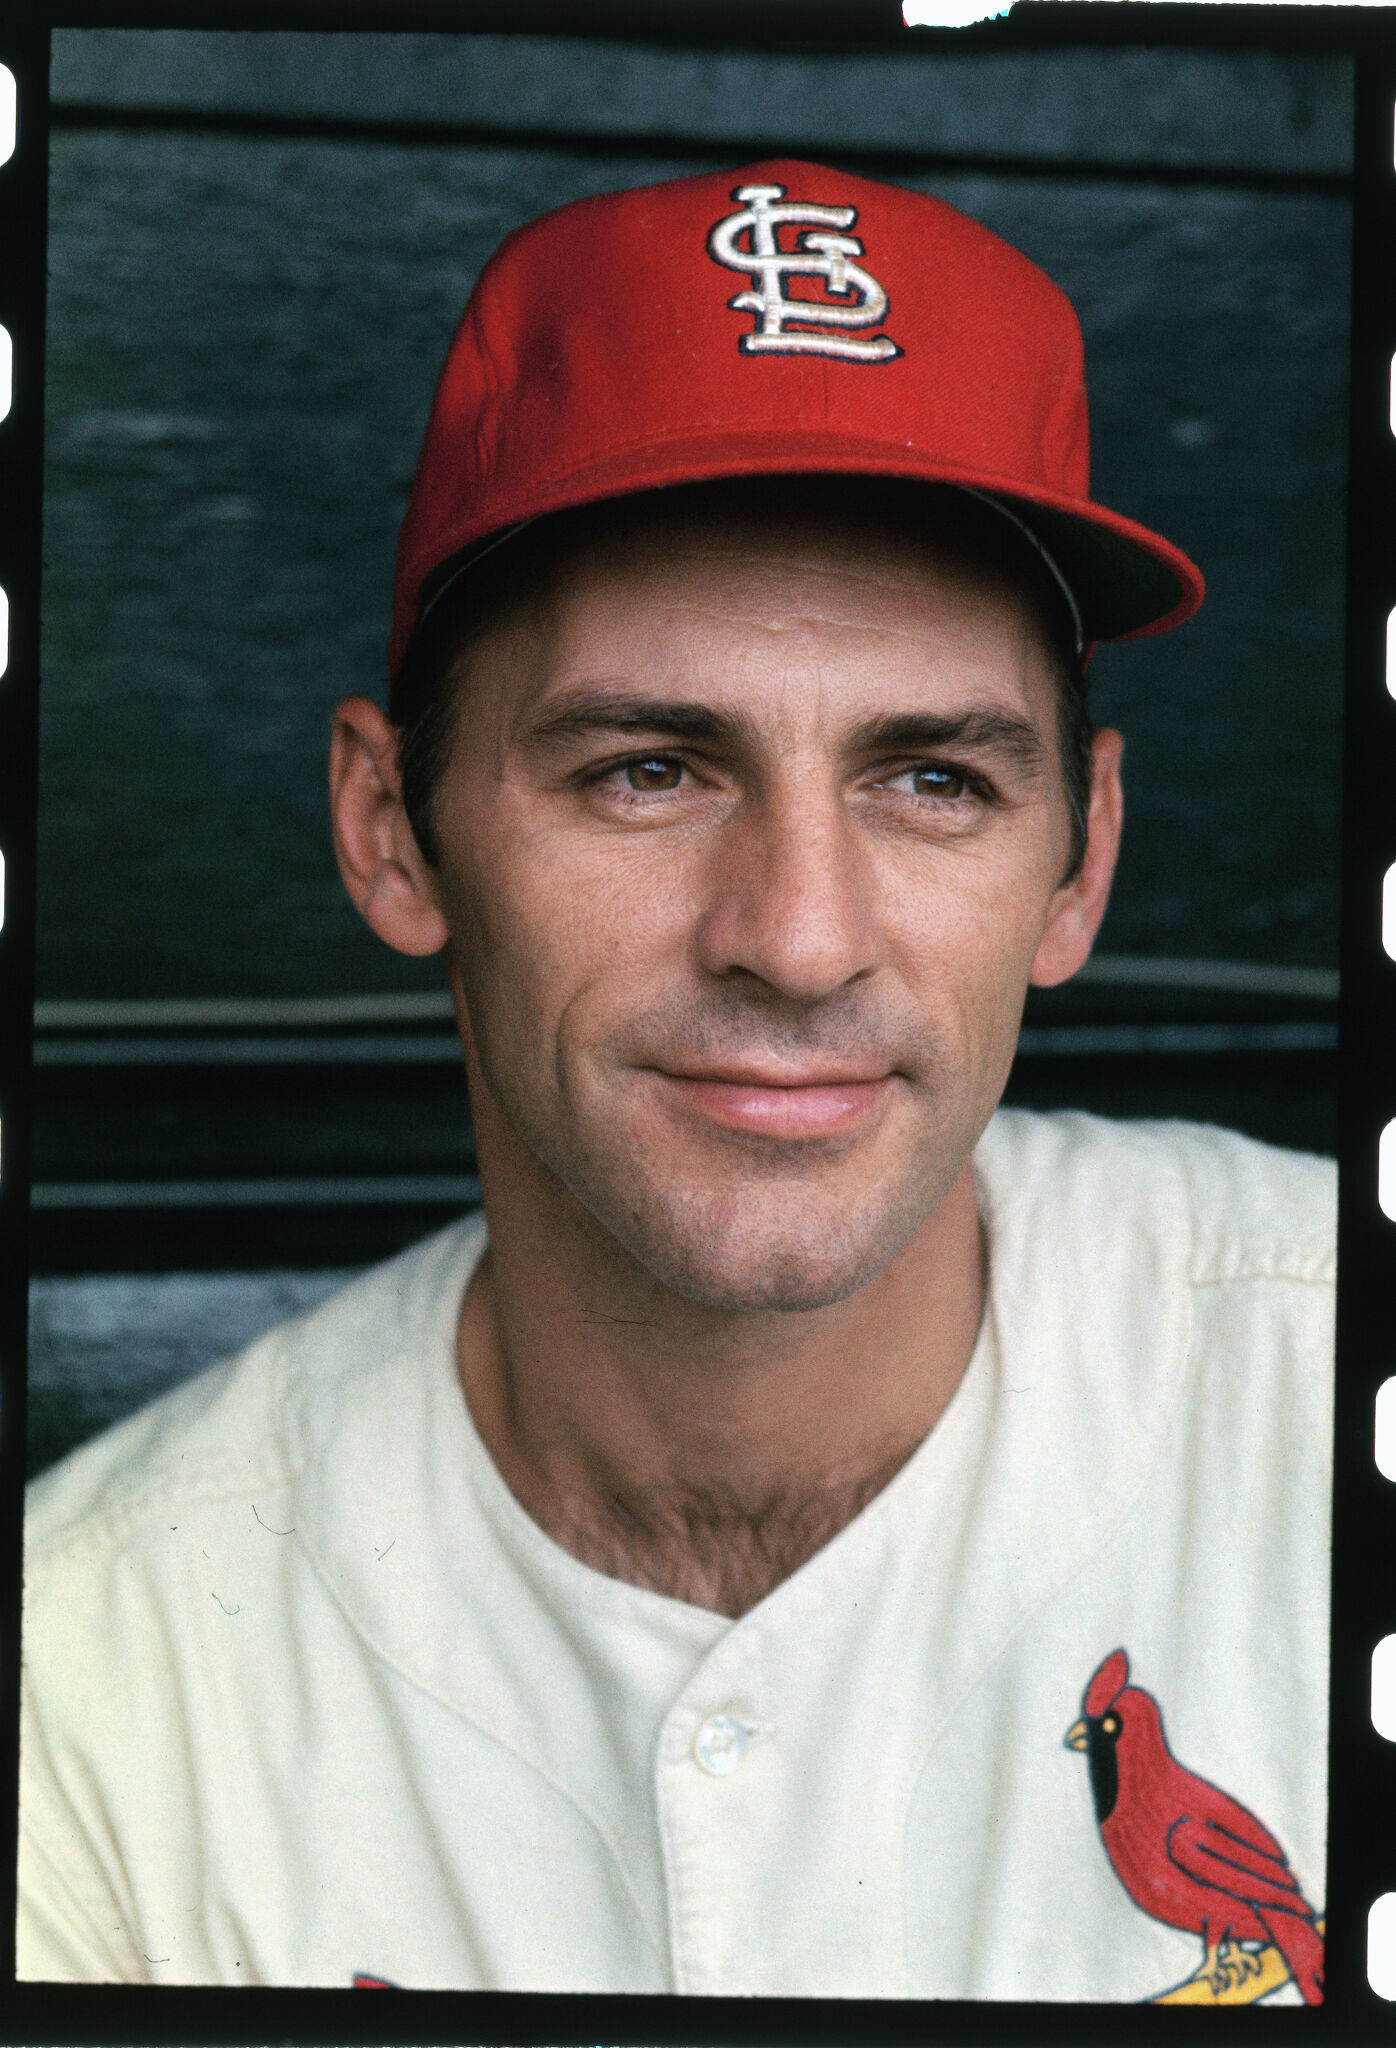 Former St. Louis Cardinals shortstop and National Baseball Hall of